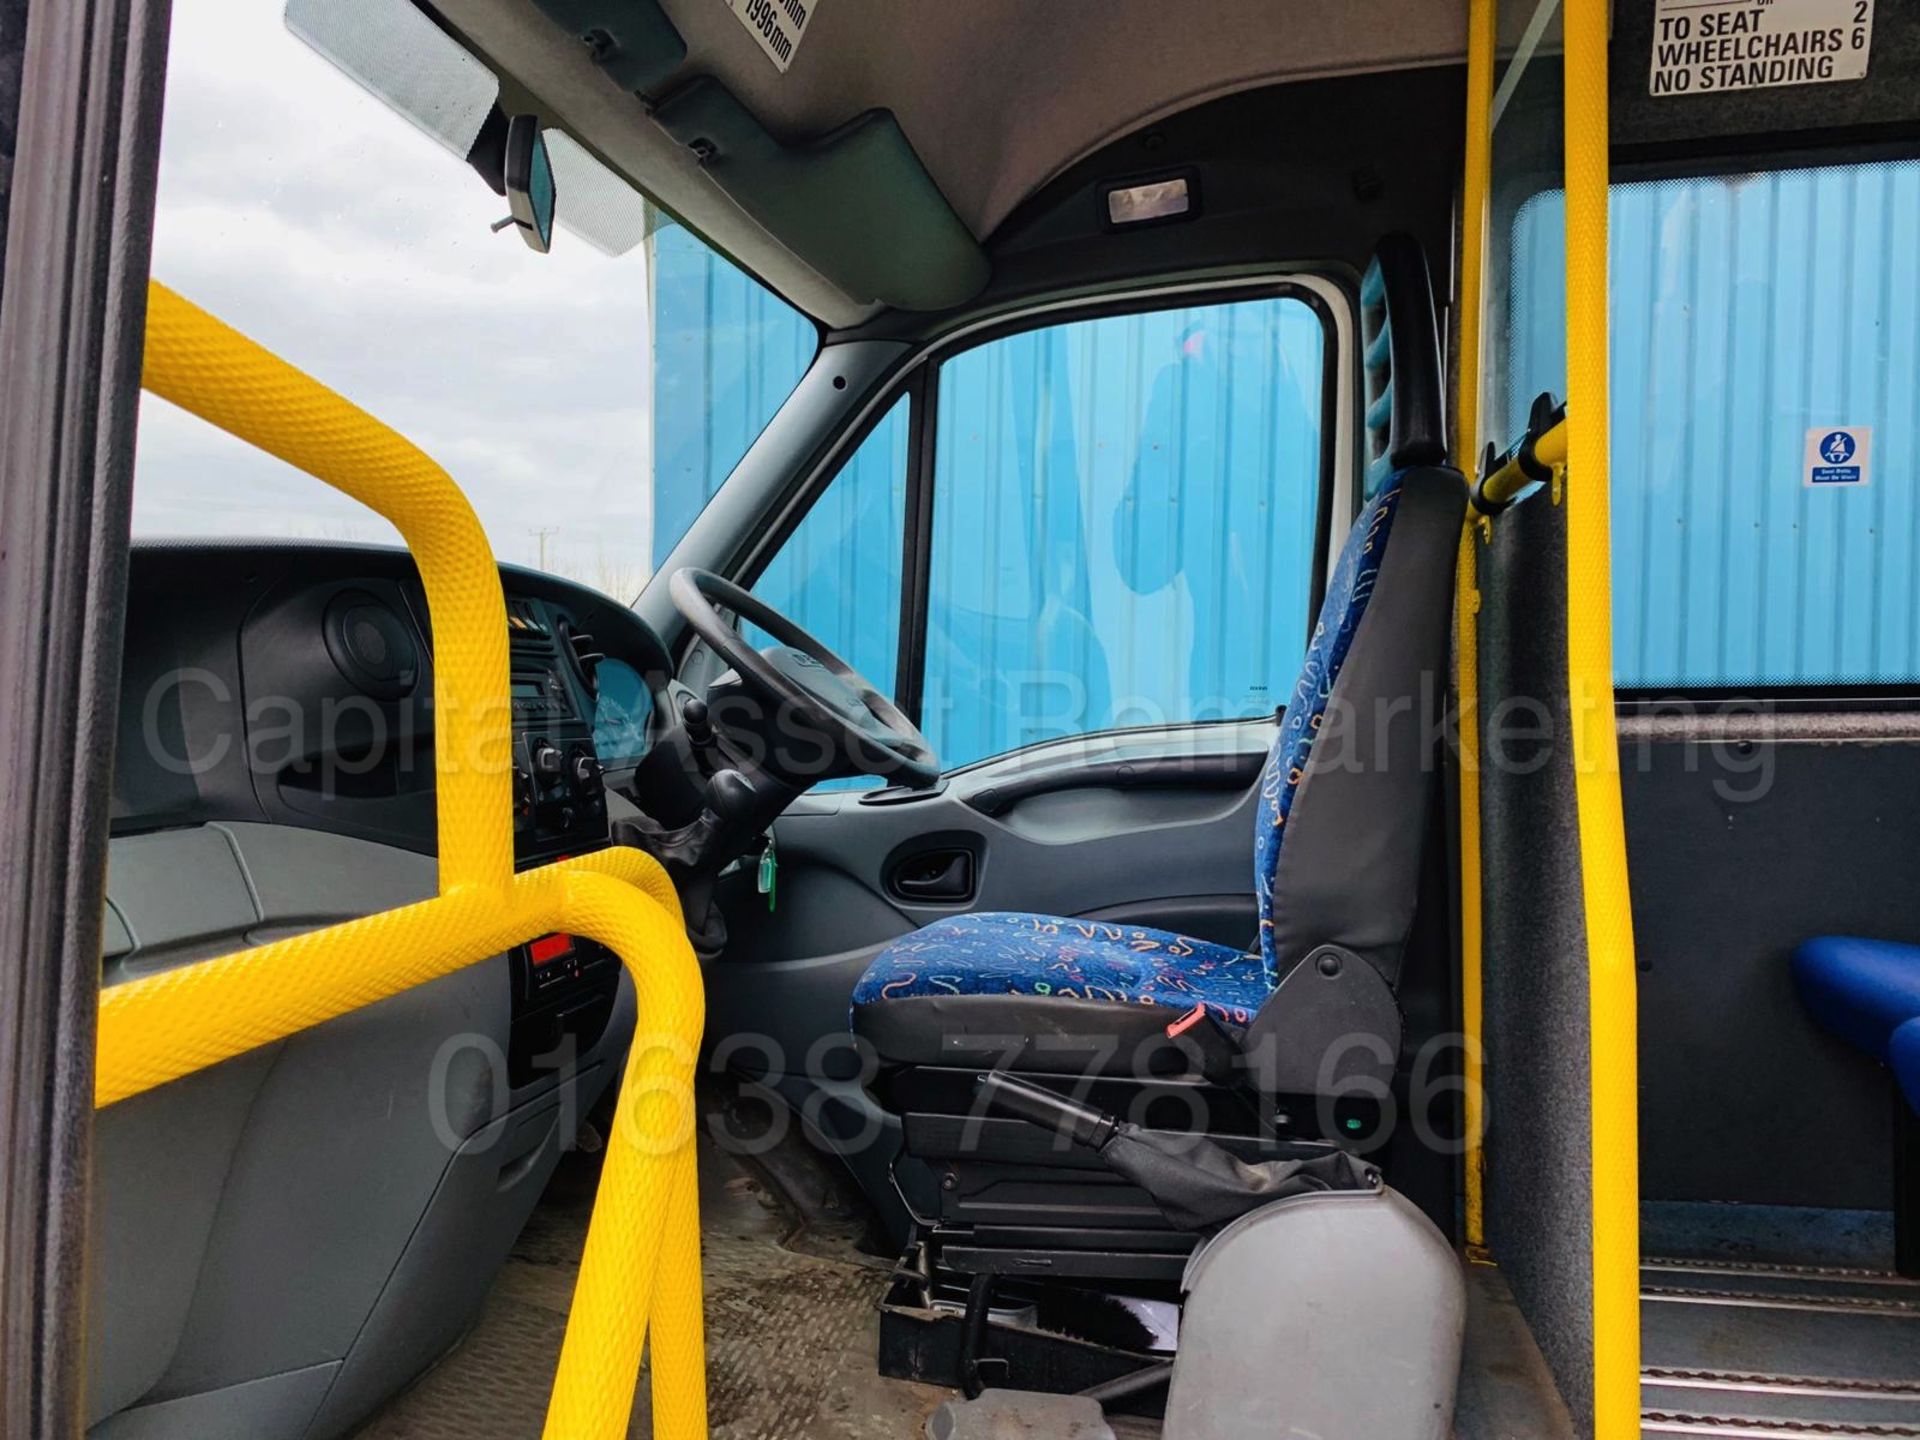 (On Sale) IVECO DAILY *LWB - 16 SEATER MINI-BUS / COACH* (57 REG) '3.0 DIESEL' *WHEEL CHAIR RAMP* - Image 27 of 29